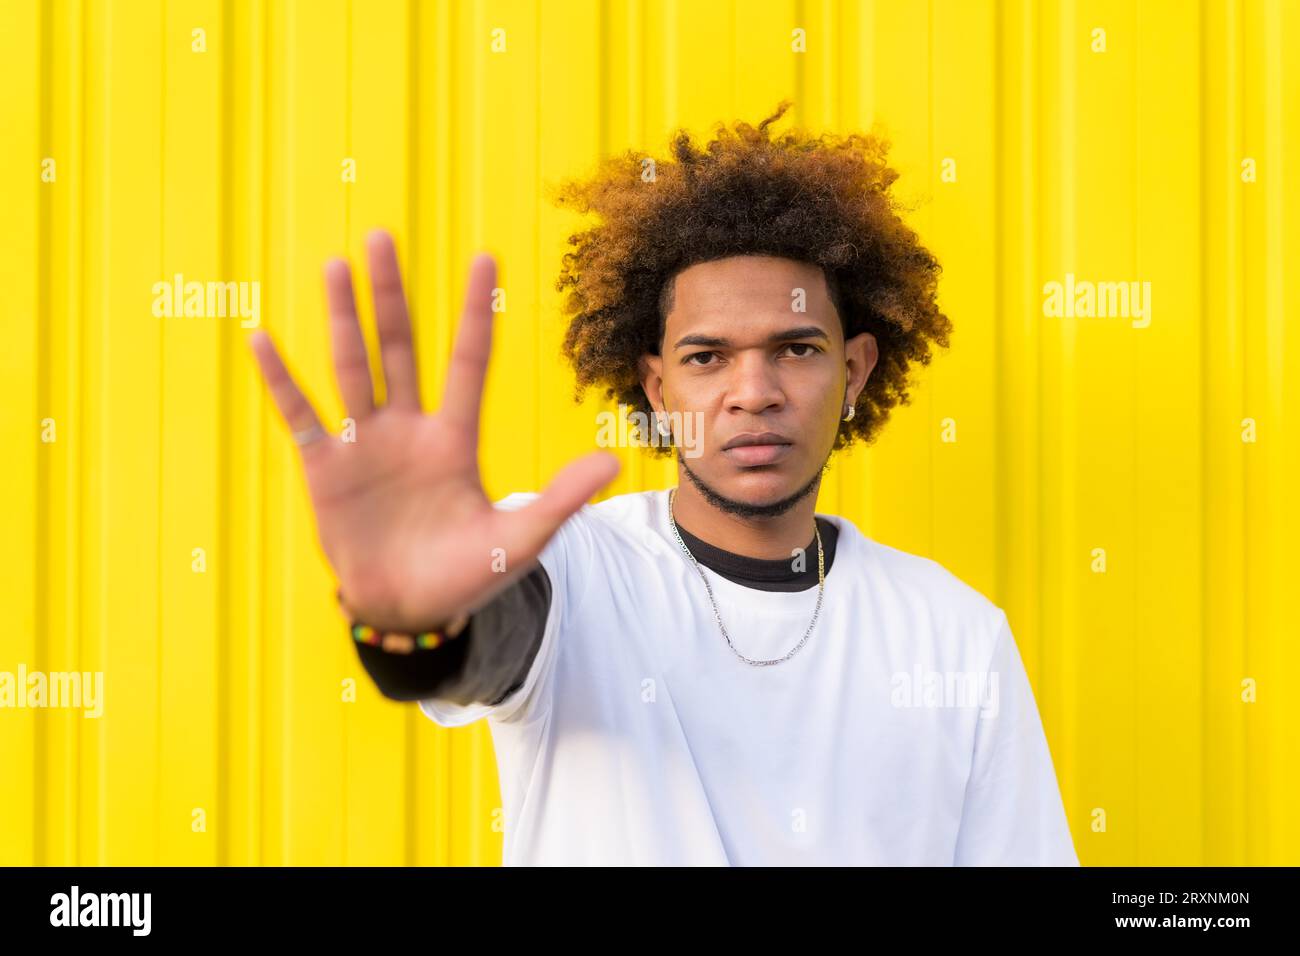 Horizontal photo with yellow background of a Mixed-raced young man gesturing stop with the hand Stock Photo